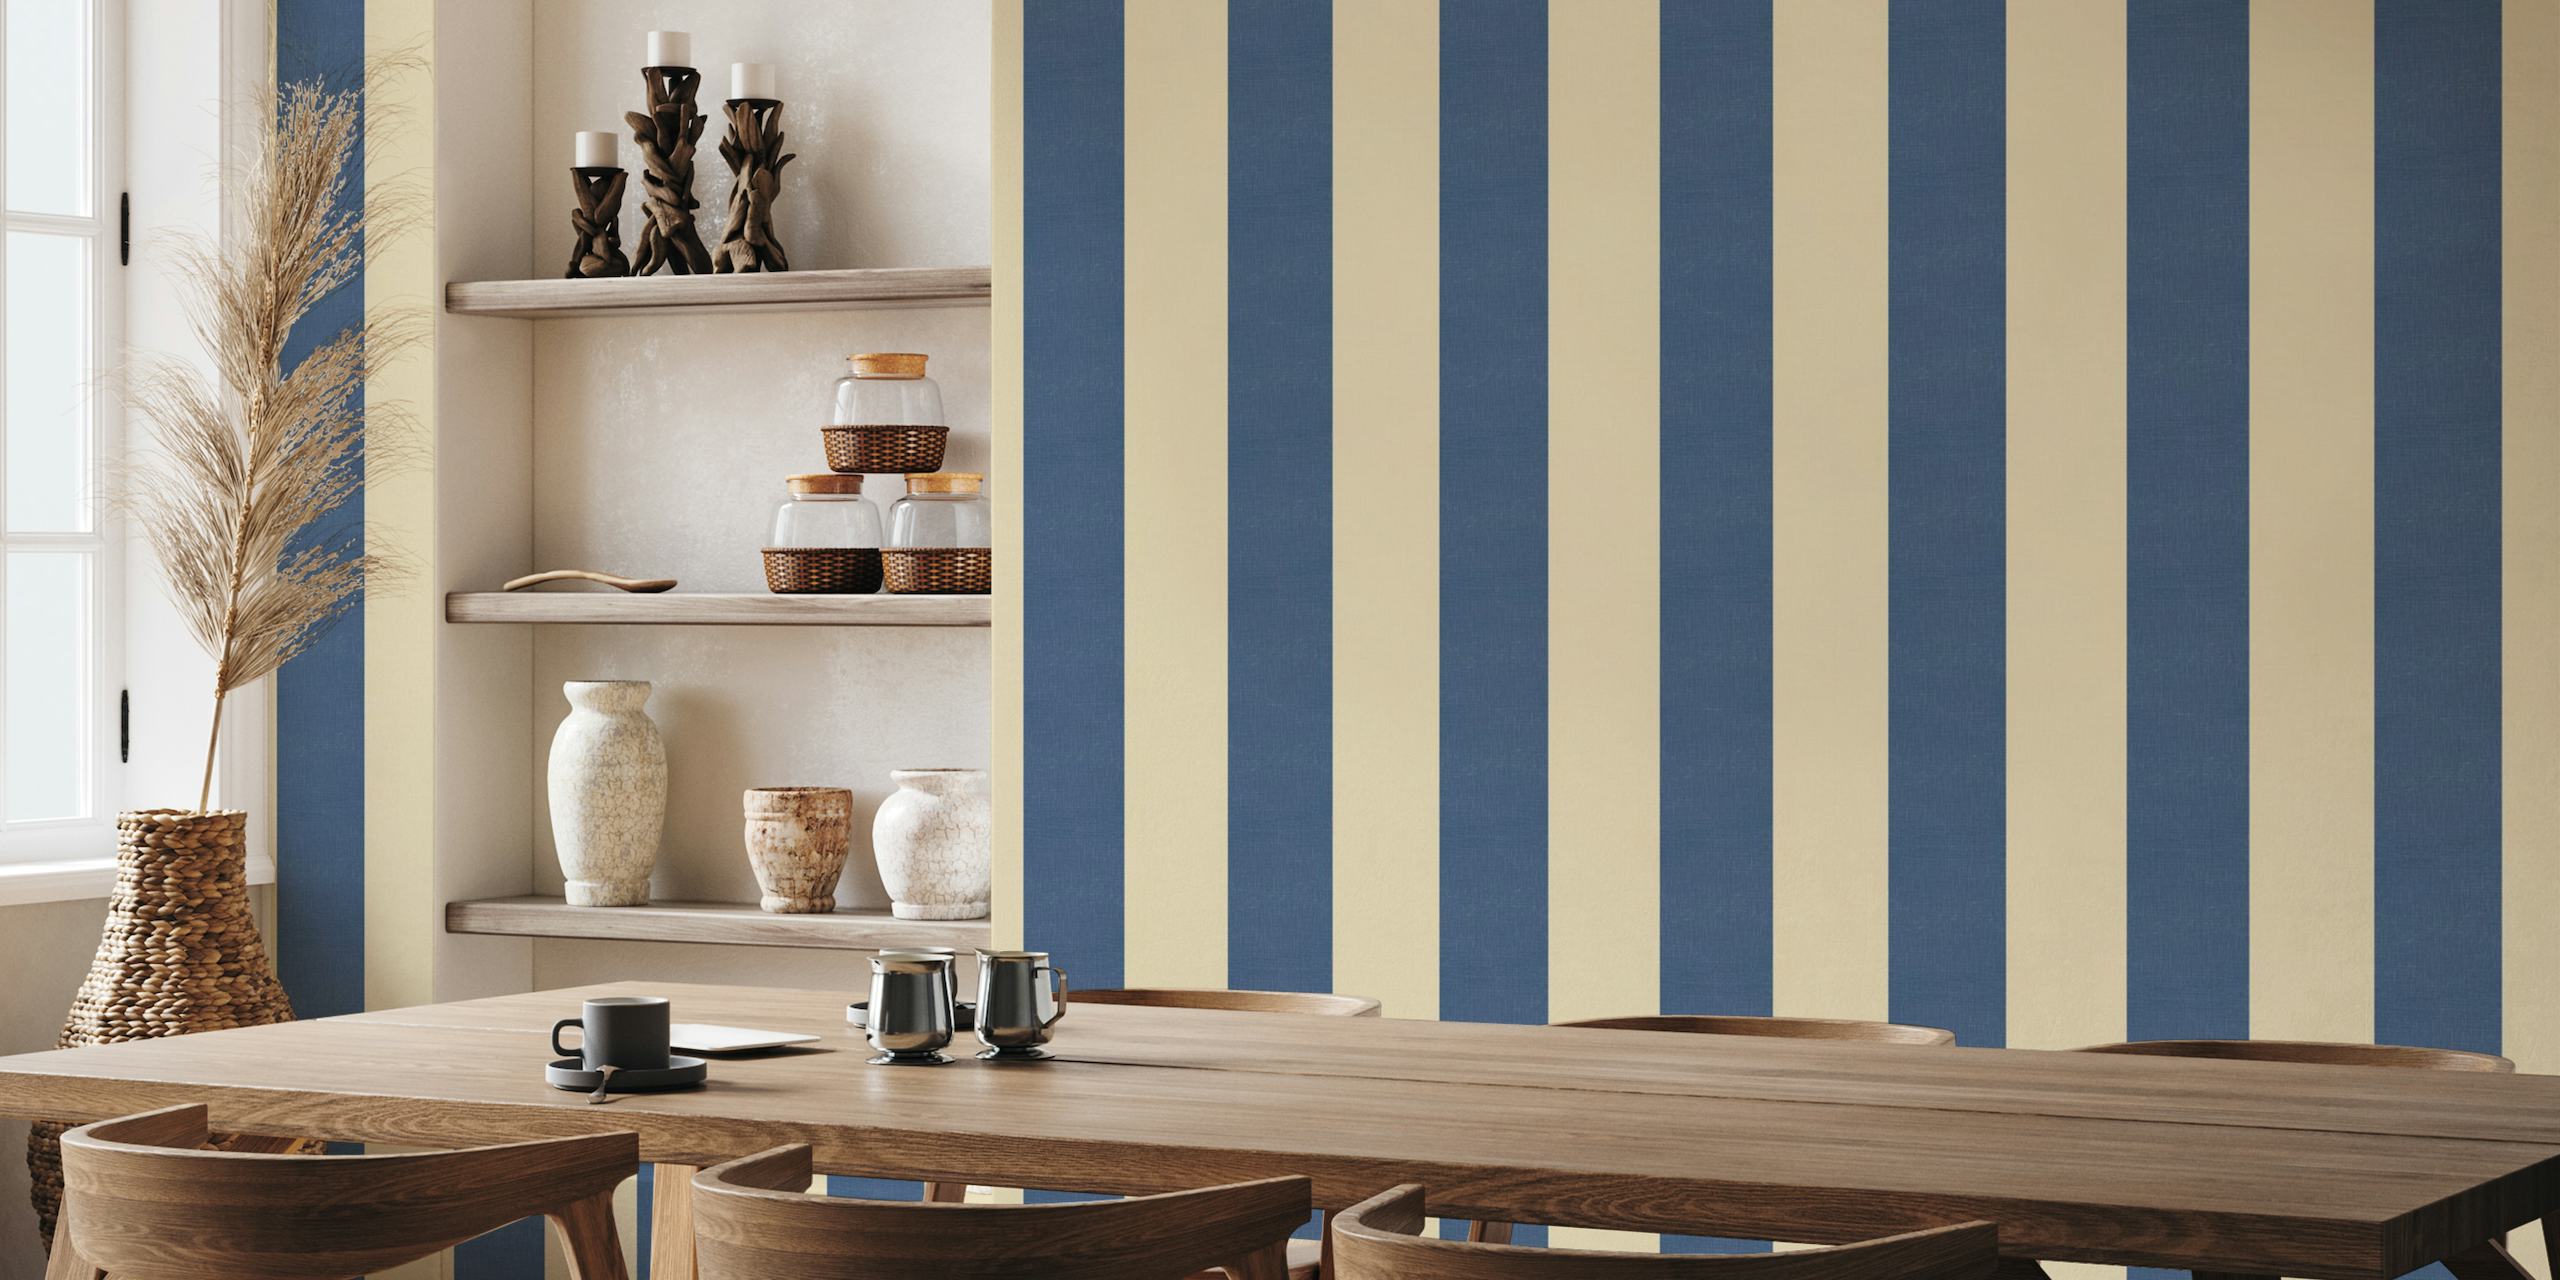 Wide textured stripes - navy blue and beige tapete